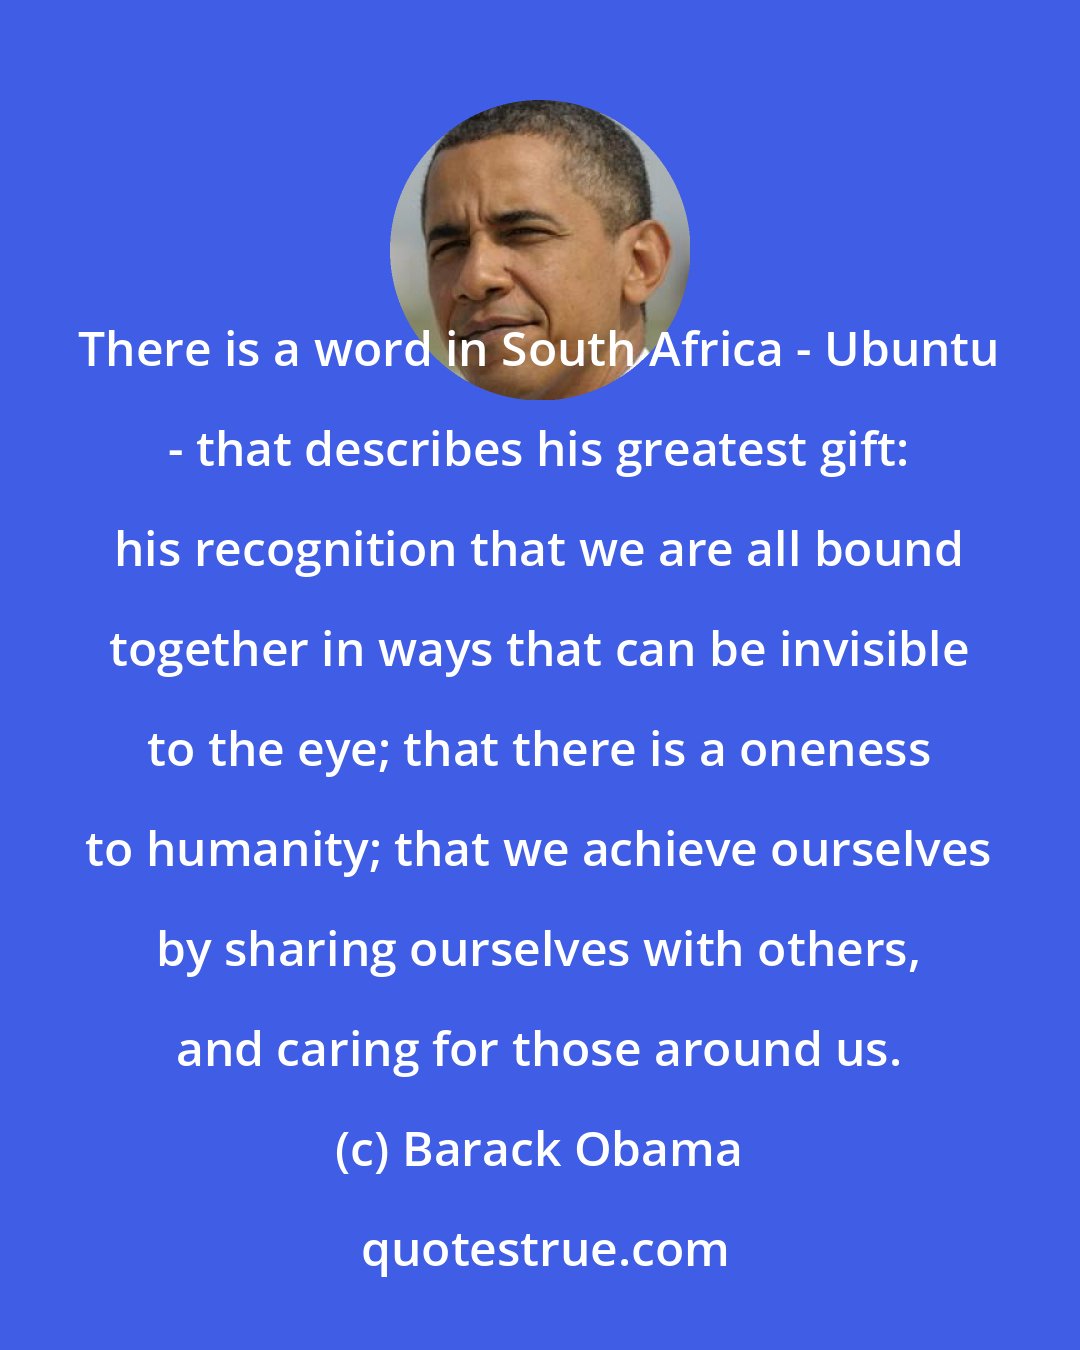 Barack Obama: There is a word in South Africa - Ubuntu - that describes his greatest gift: his recognition that we are all bound together in ways that can be invisible to the eye; that there is a oneness to humanity; that we achieve ourselves by sharing ourselves with others, and caring for those around us.